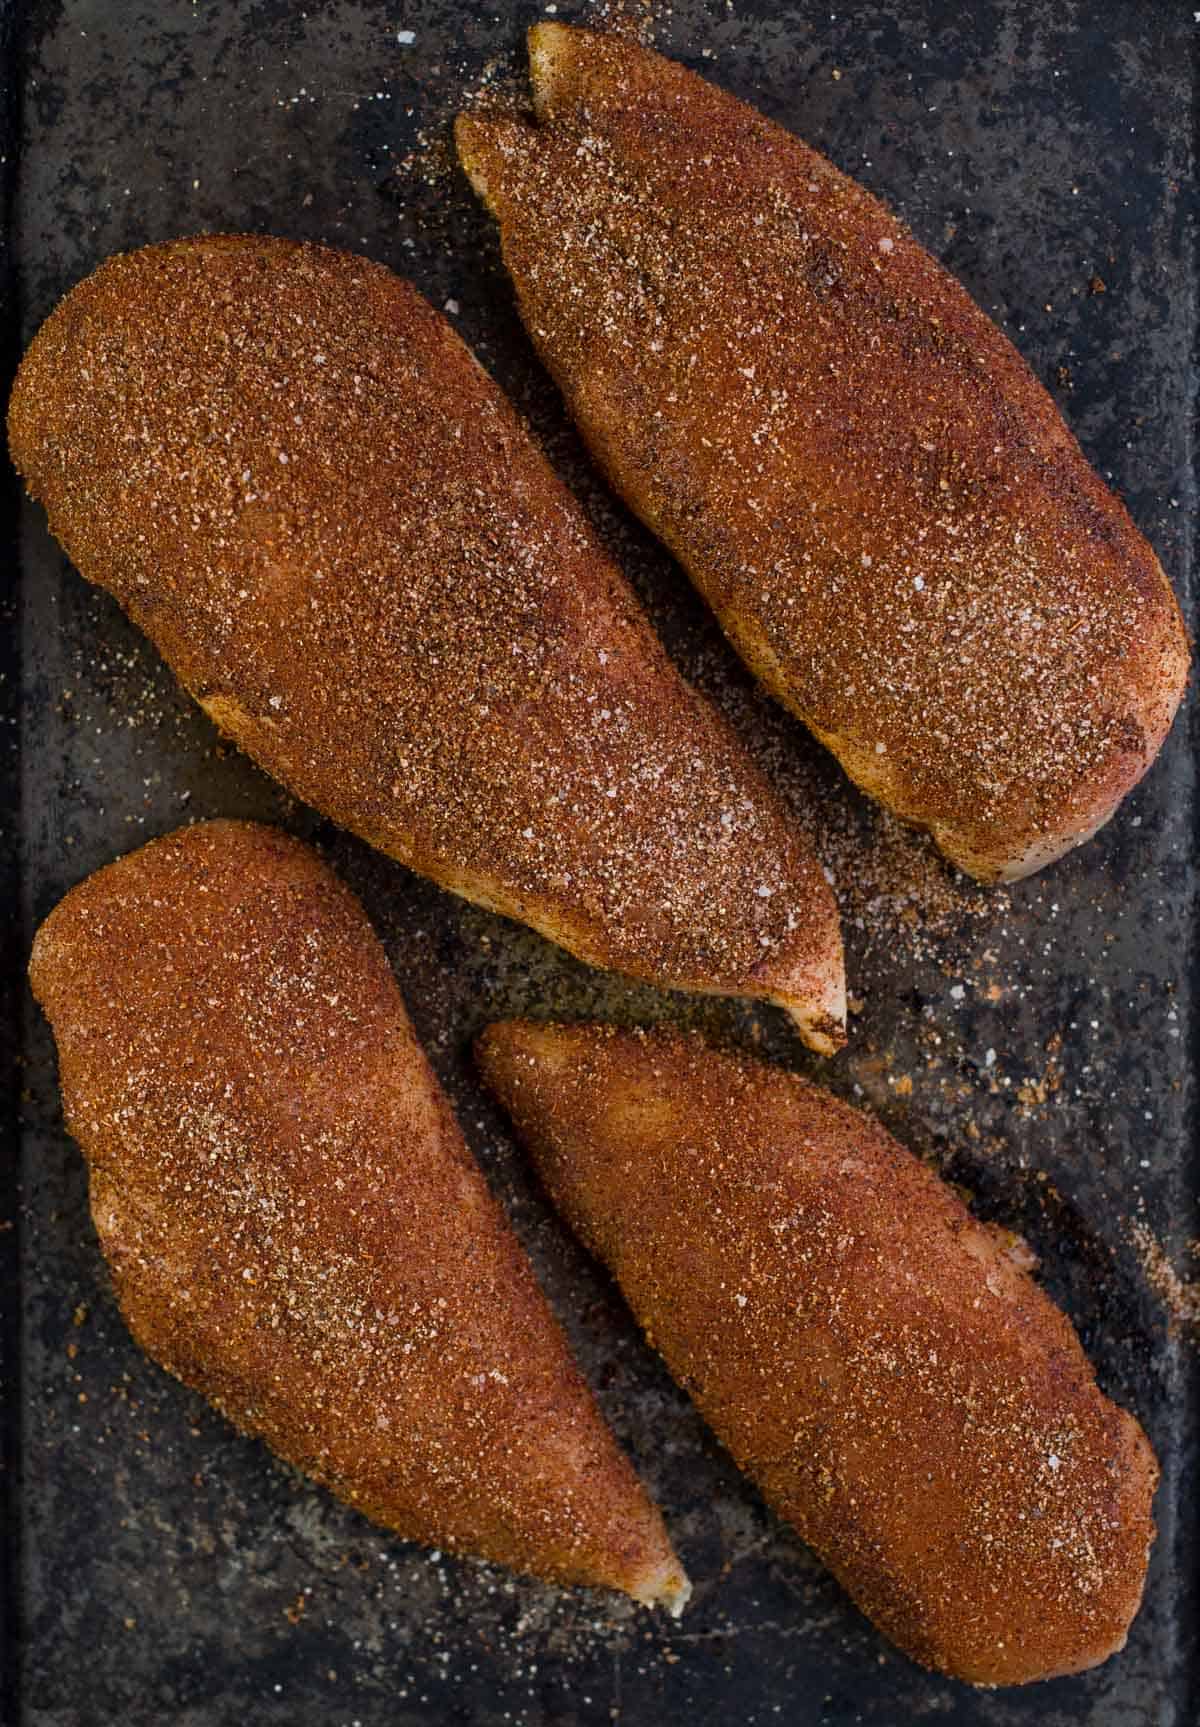 Raw boneless skinless chicken breasts coated with a dry seasoning